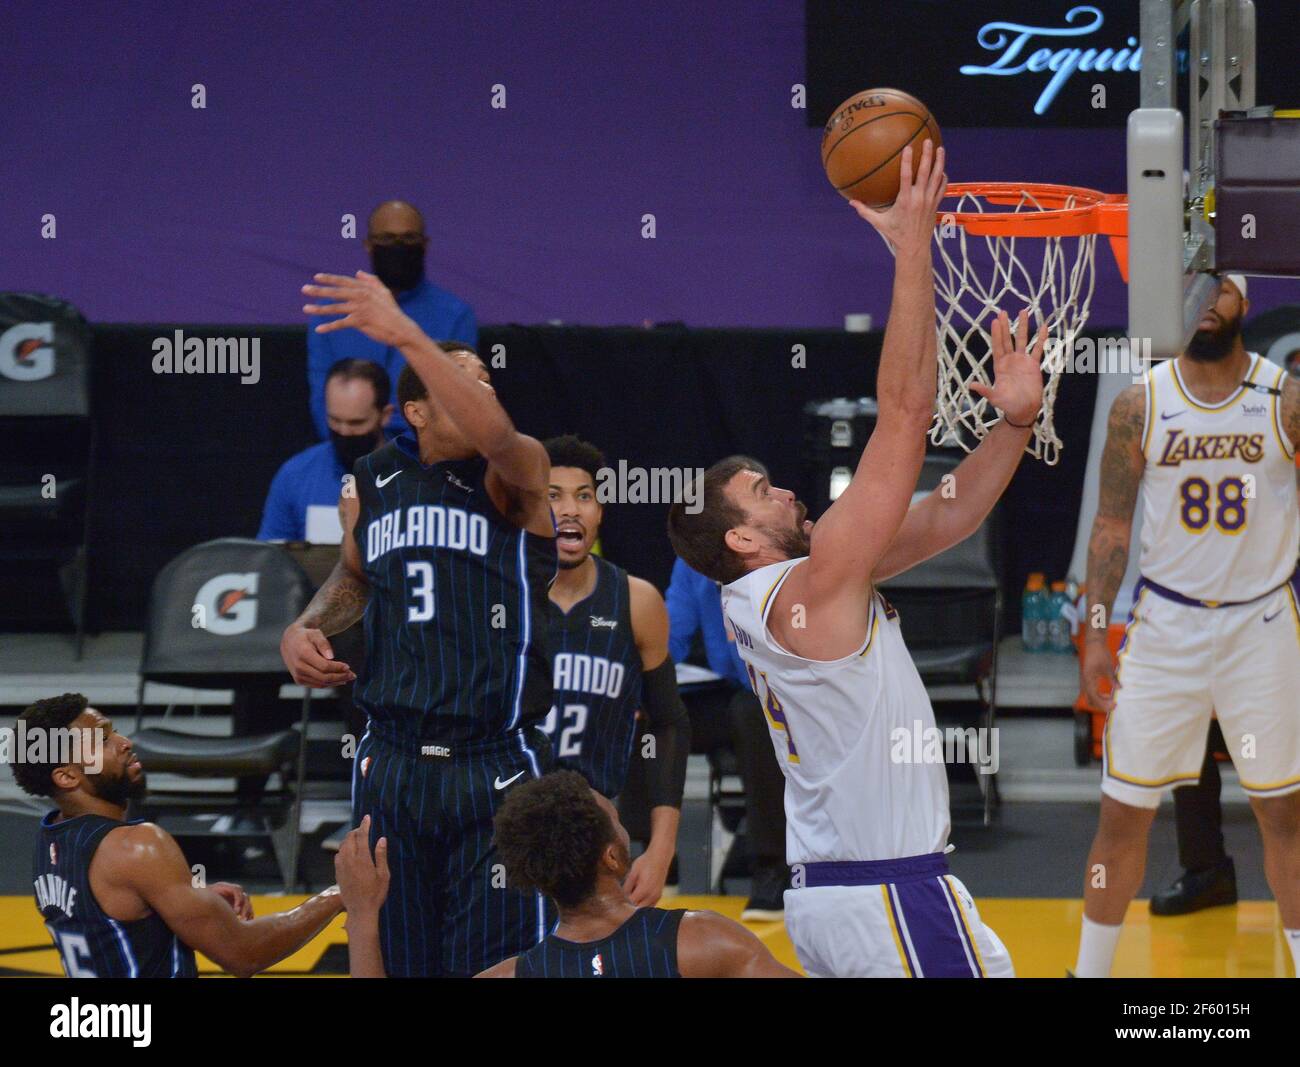 Los Angeles, United States. 29th Mar, 2021. Los Angeles Lakers' center Marc Gasol scores on Orlando Magic defenders during the first half at Staples Center in Los Angeles on Sunday, March 28, 2021. The Lakers defeated the Magic 96-93. Photo by Jim Ruymen/UPI Credit: UPI/Alamy Live News Stock Photo